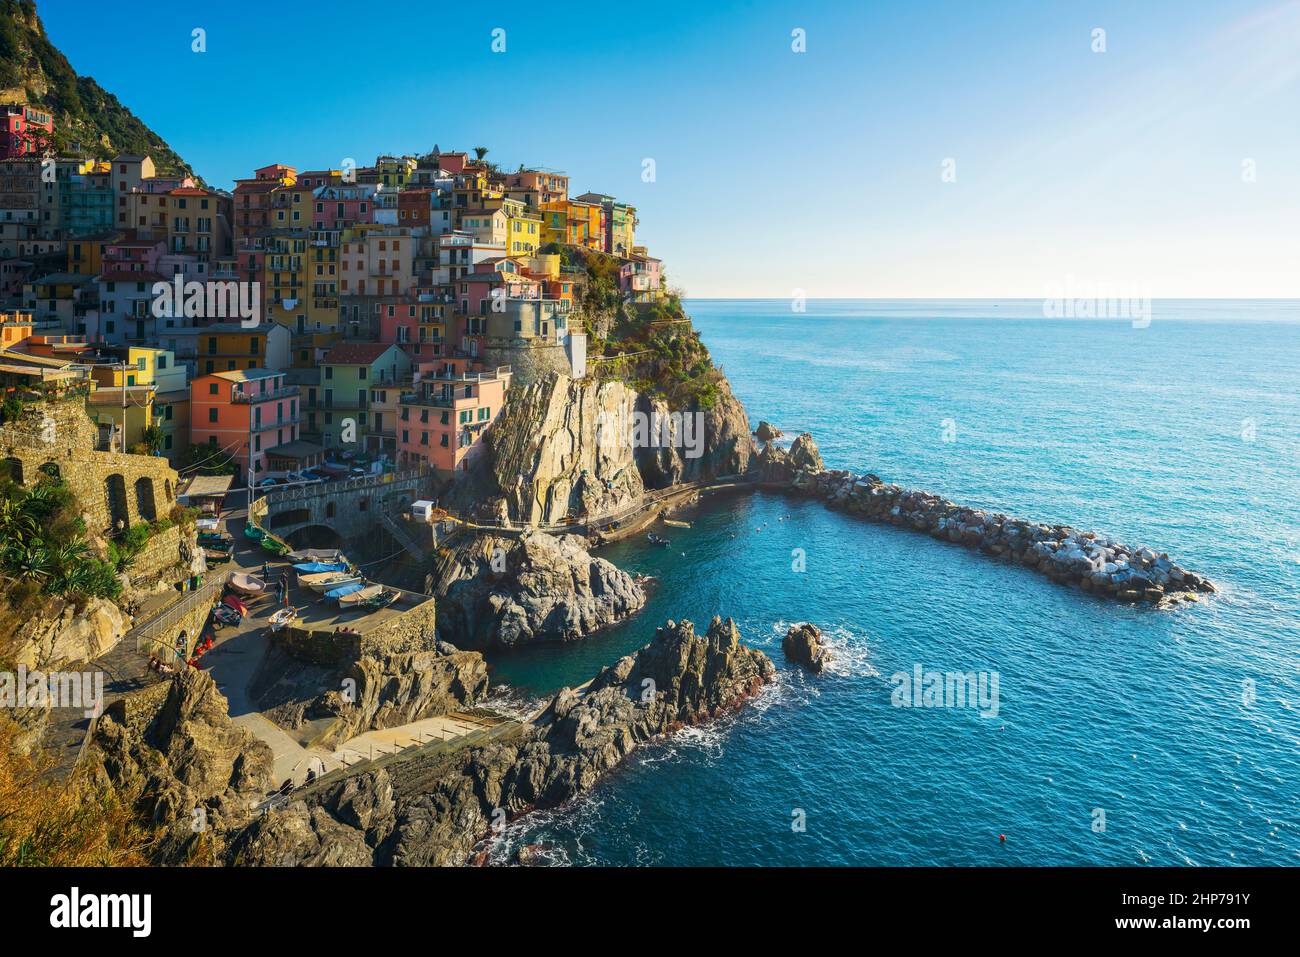 Manarola, village on the rocks, on a clear day. Seascape in Cinque Terre National Park, Unesco Site, Liguria region, Italy, Europe. Stock Photo